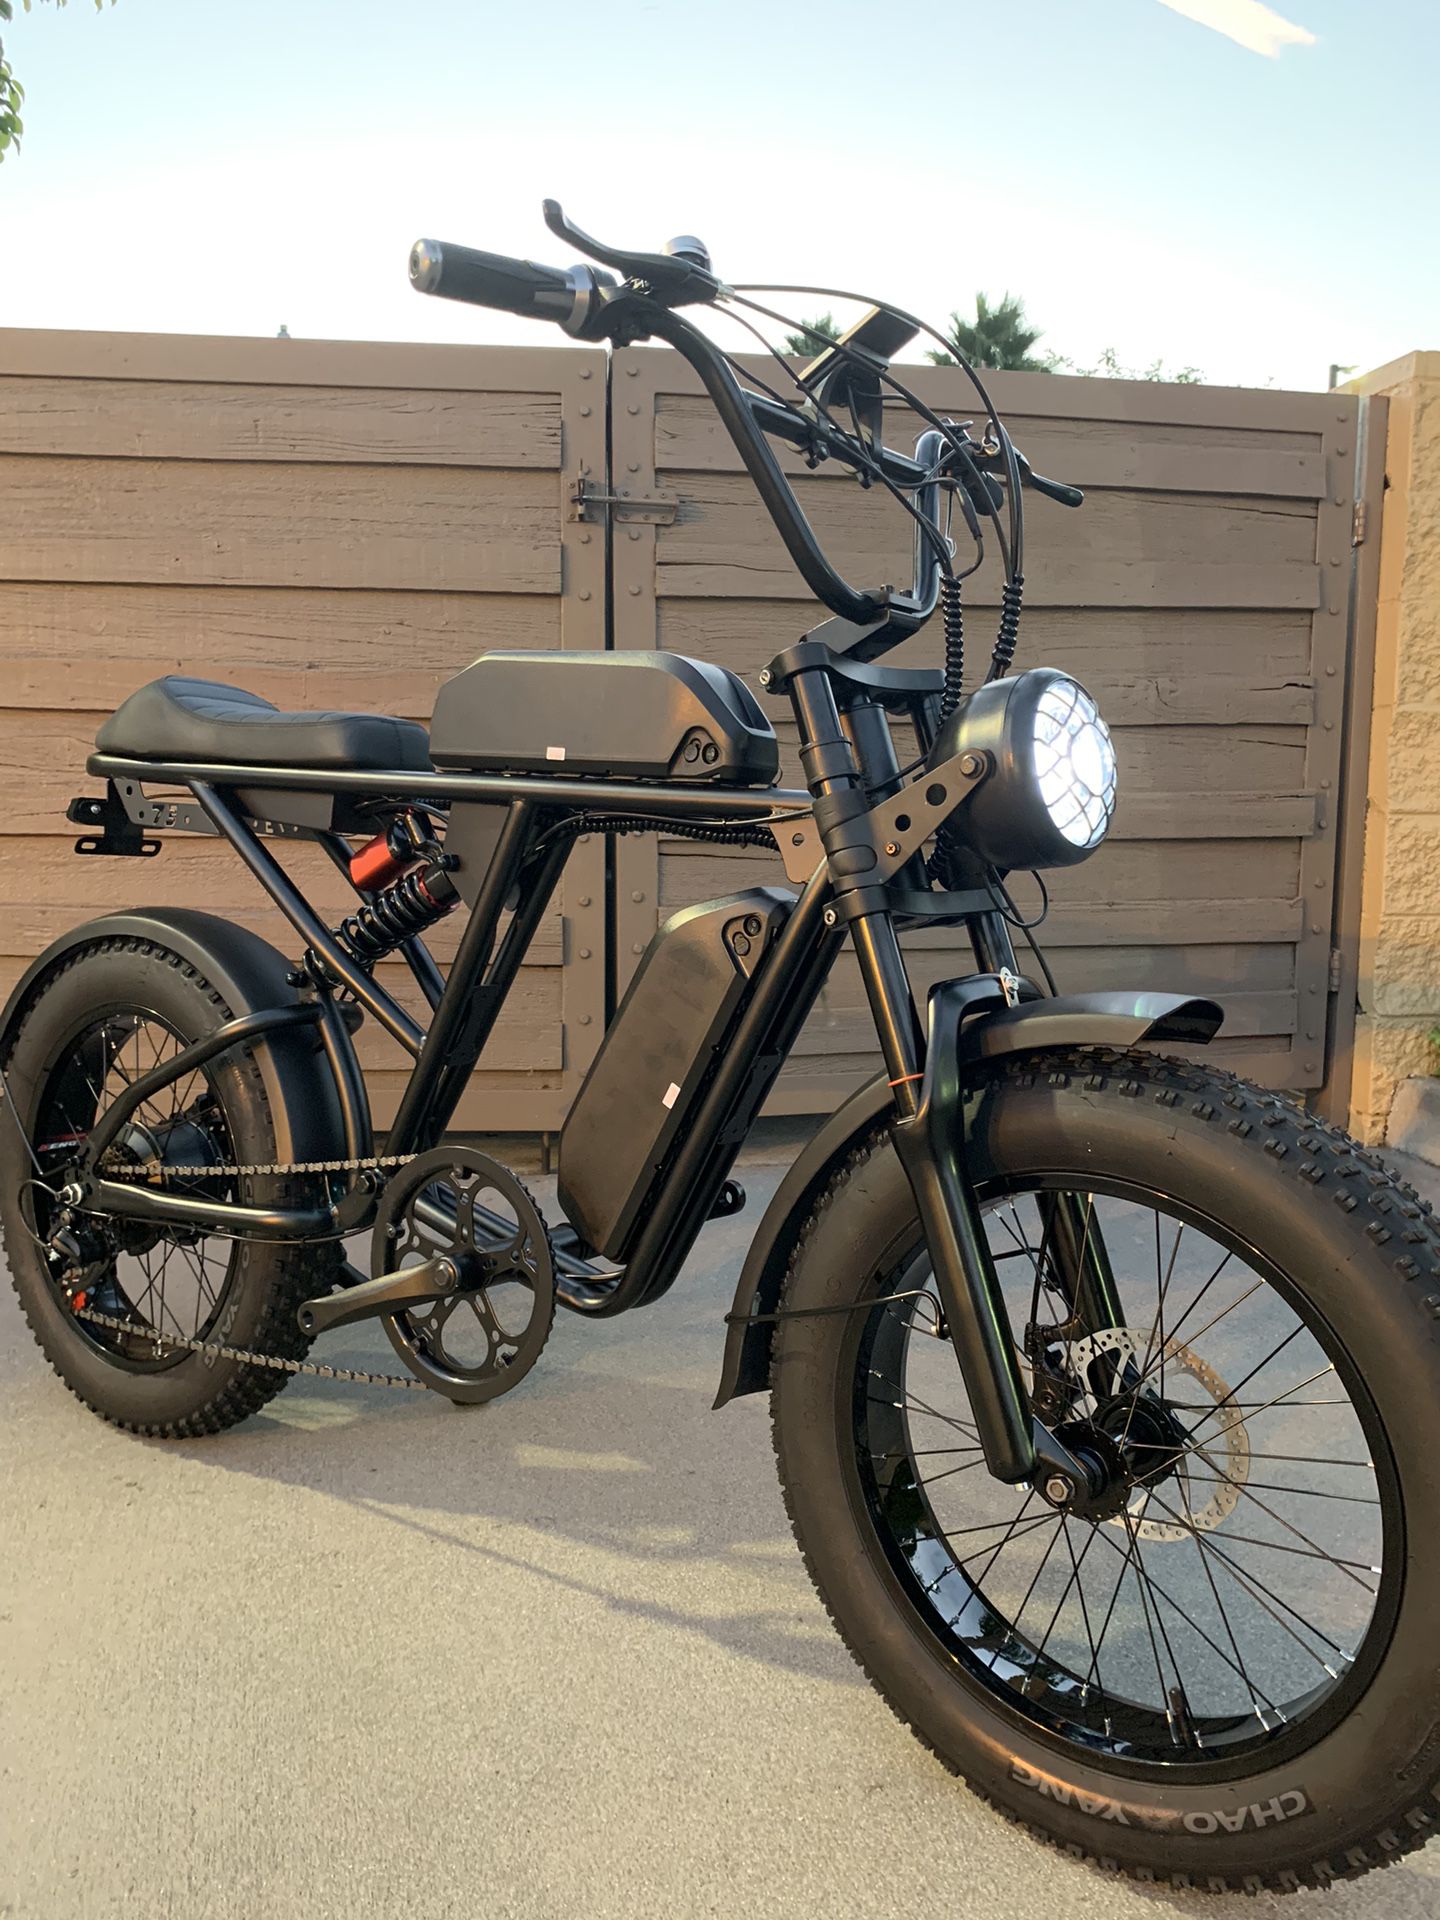 NEW! Electric Bike, Full Suspension, 750 Watt, Dual Battery, Up To 85 Miles (pedal Assist 1), 33MPH, Black 